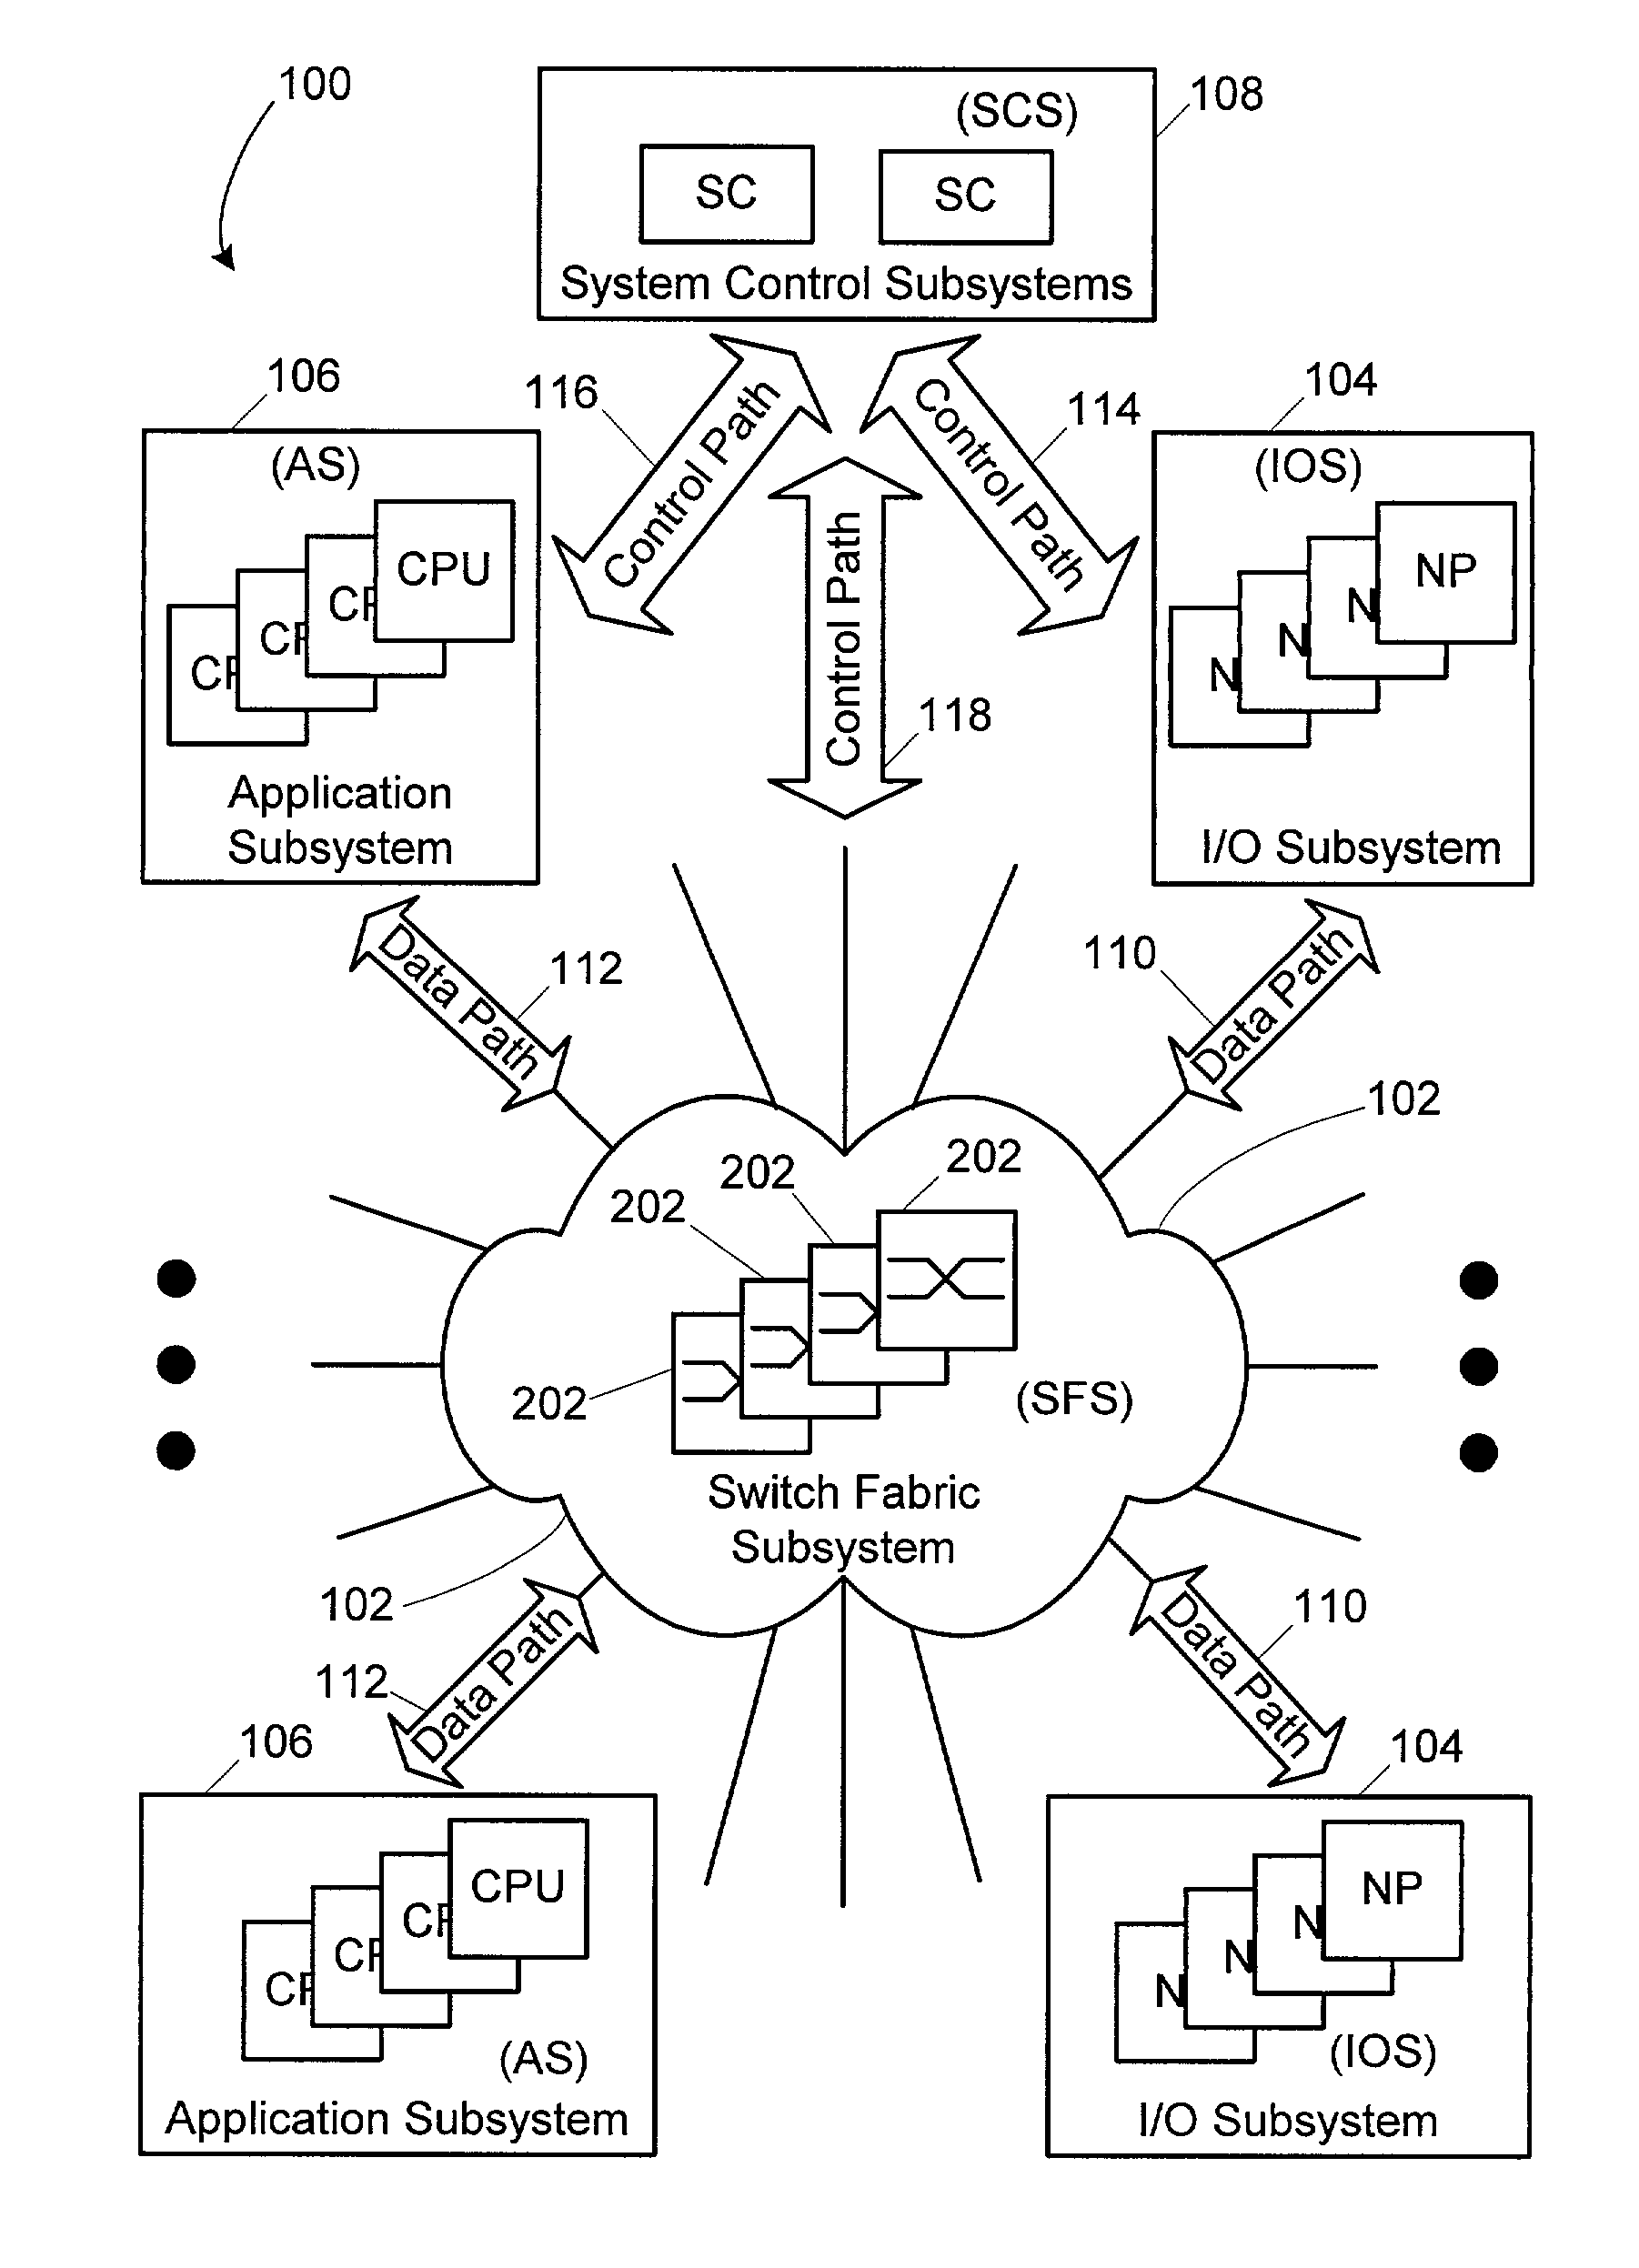 Scalable switch fabric system and apparatus for computer networks